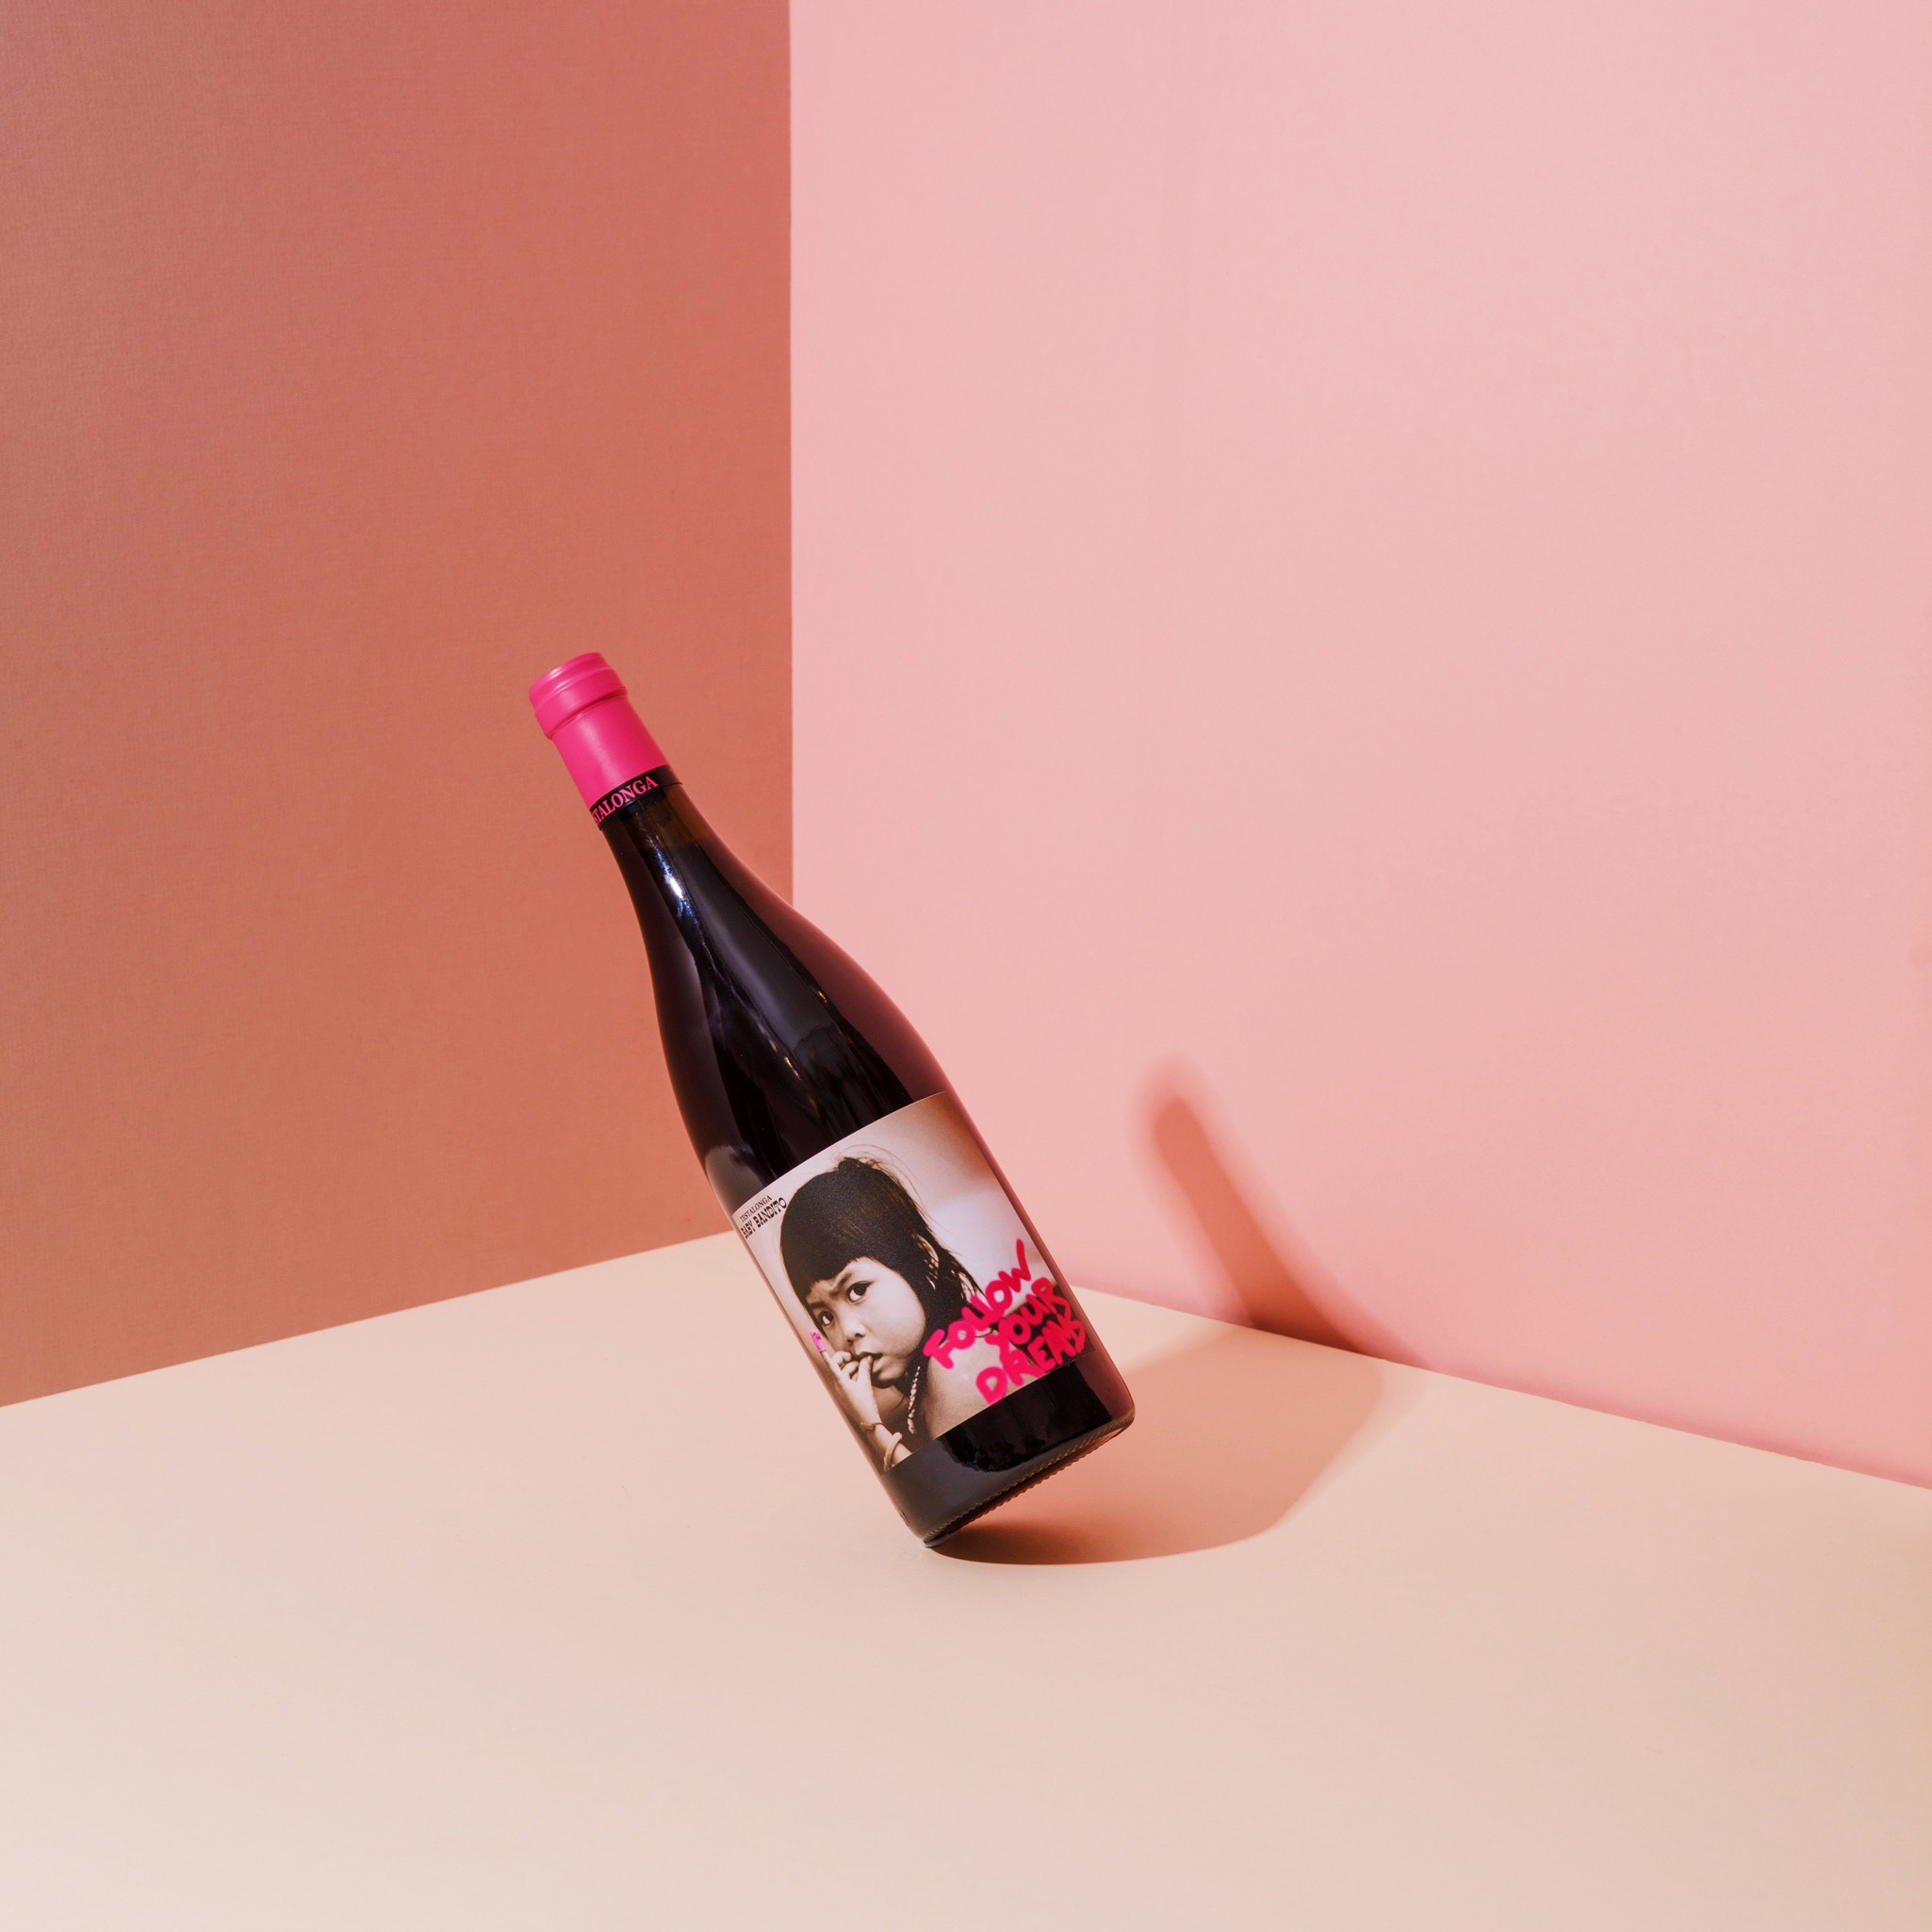 Bottle of wine balanced on edge leaning backwards unnaturally. Background colours pink and mauve